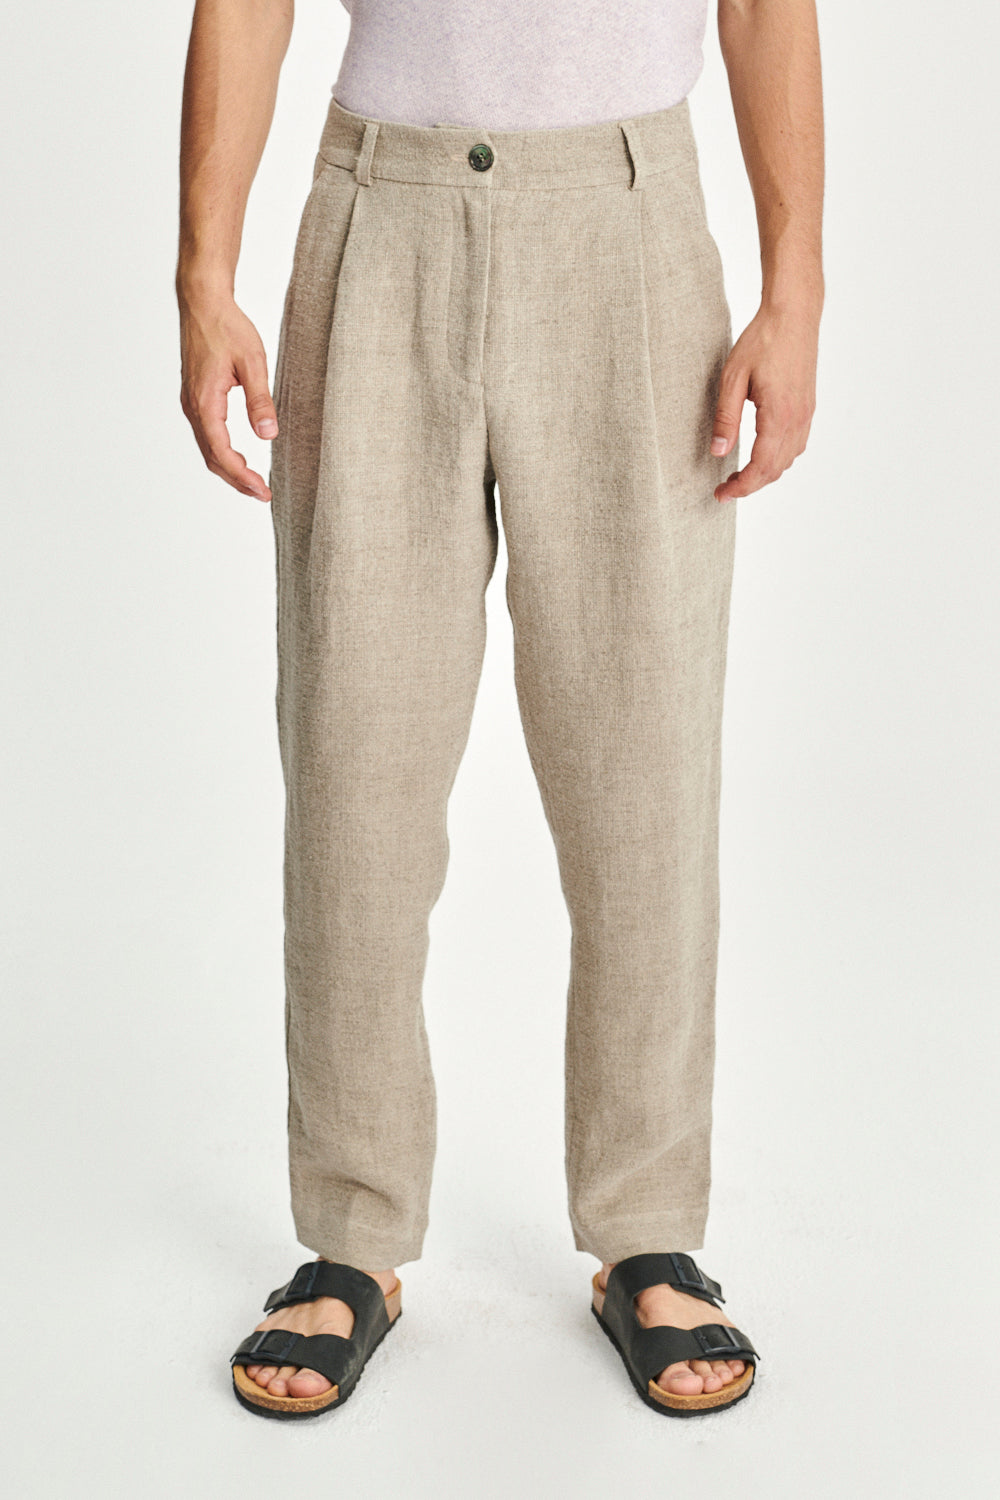 Genuine Trousers in a Beige Fluid and Chunky Italian Linen Crepe